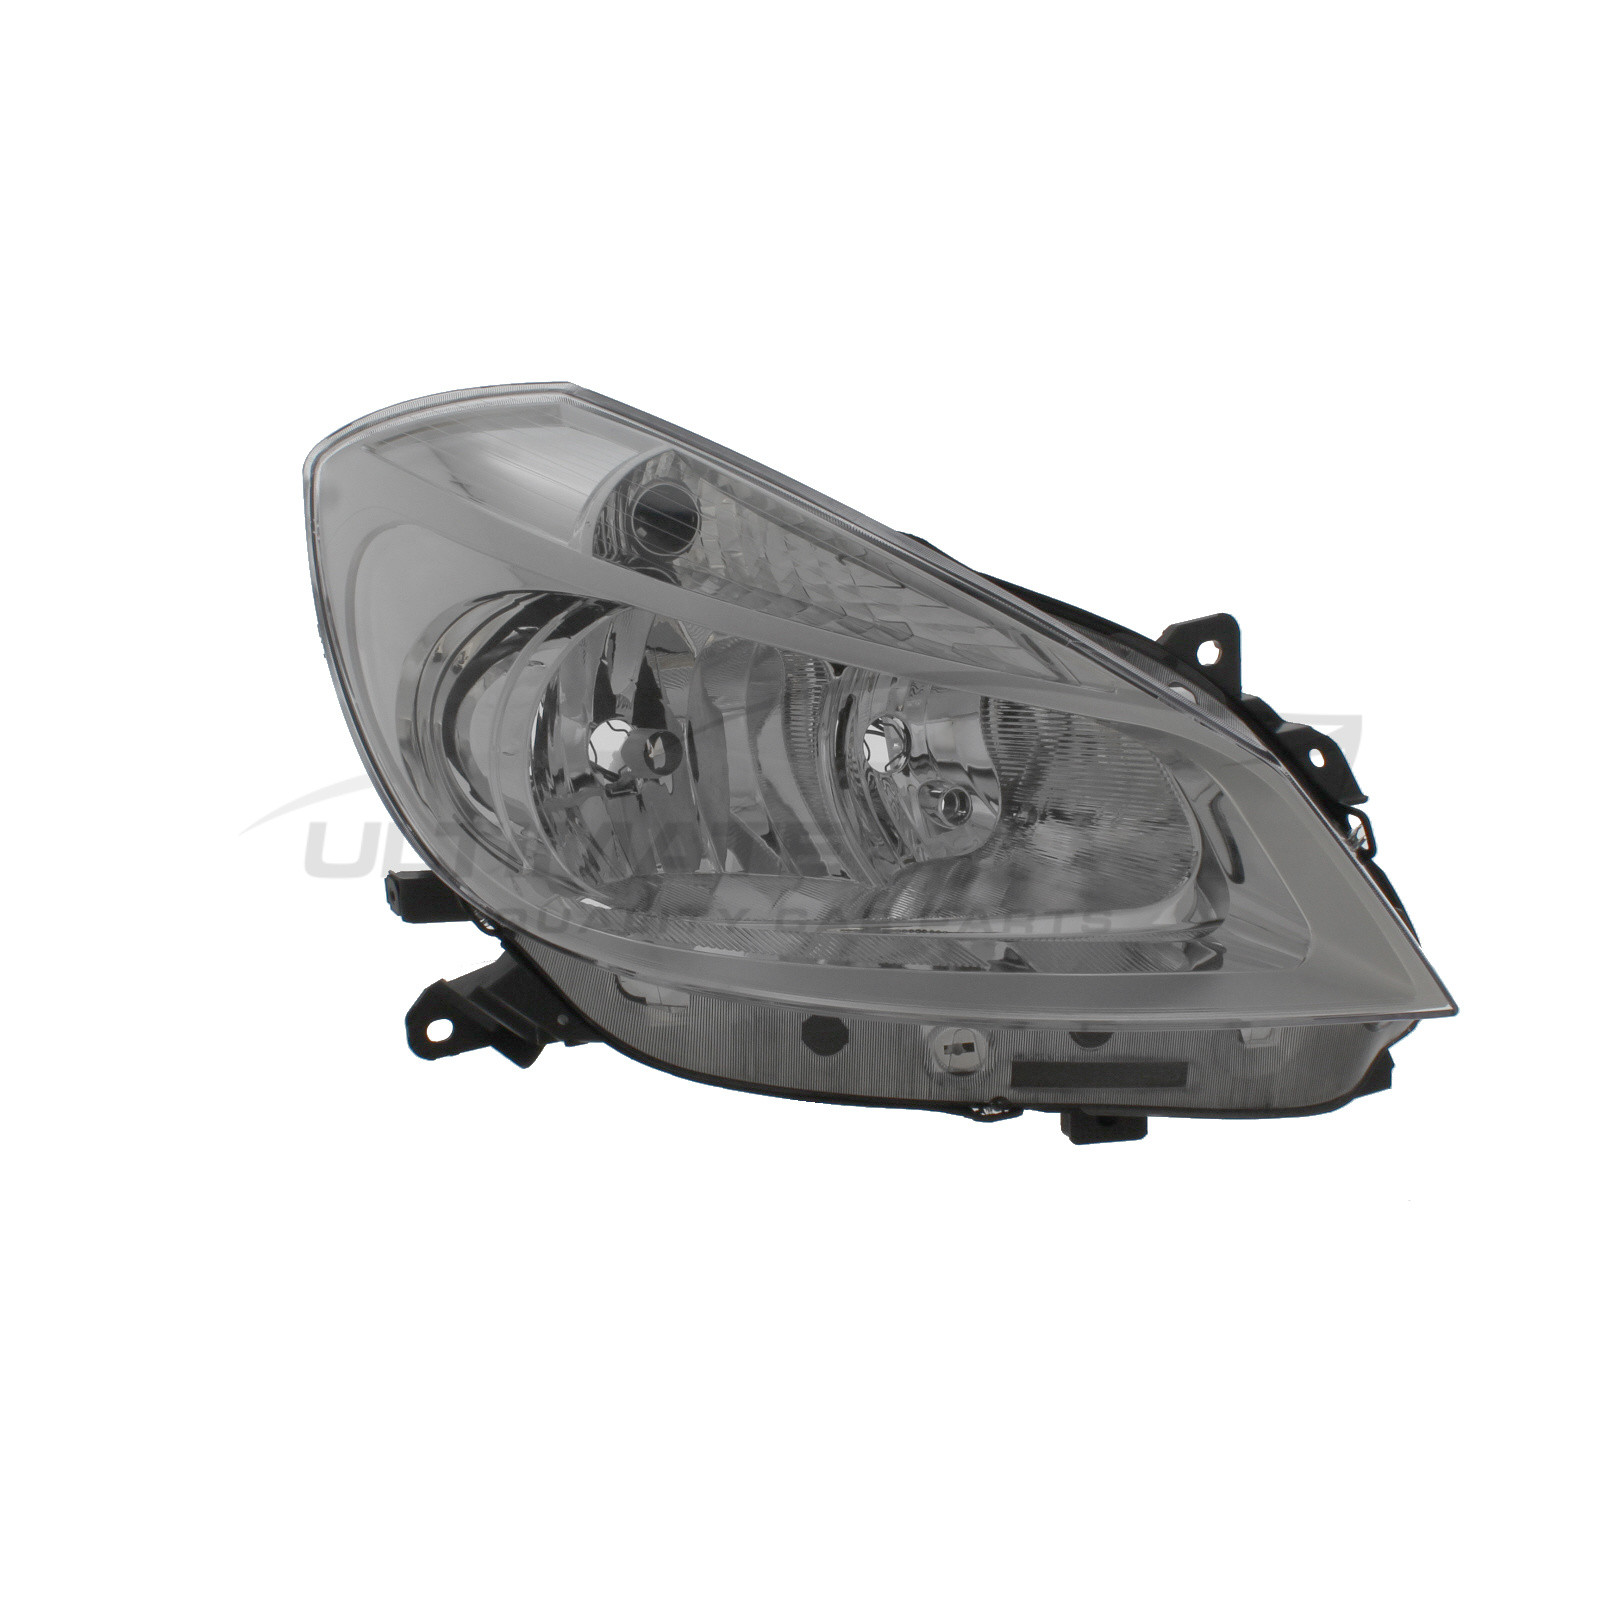 Renault Clio 2005-2009 Halogen, Electric Without Motor, Chrome Headlight / Headlamp (Non-Projector Type) Drivers Side (RH)